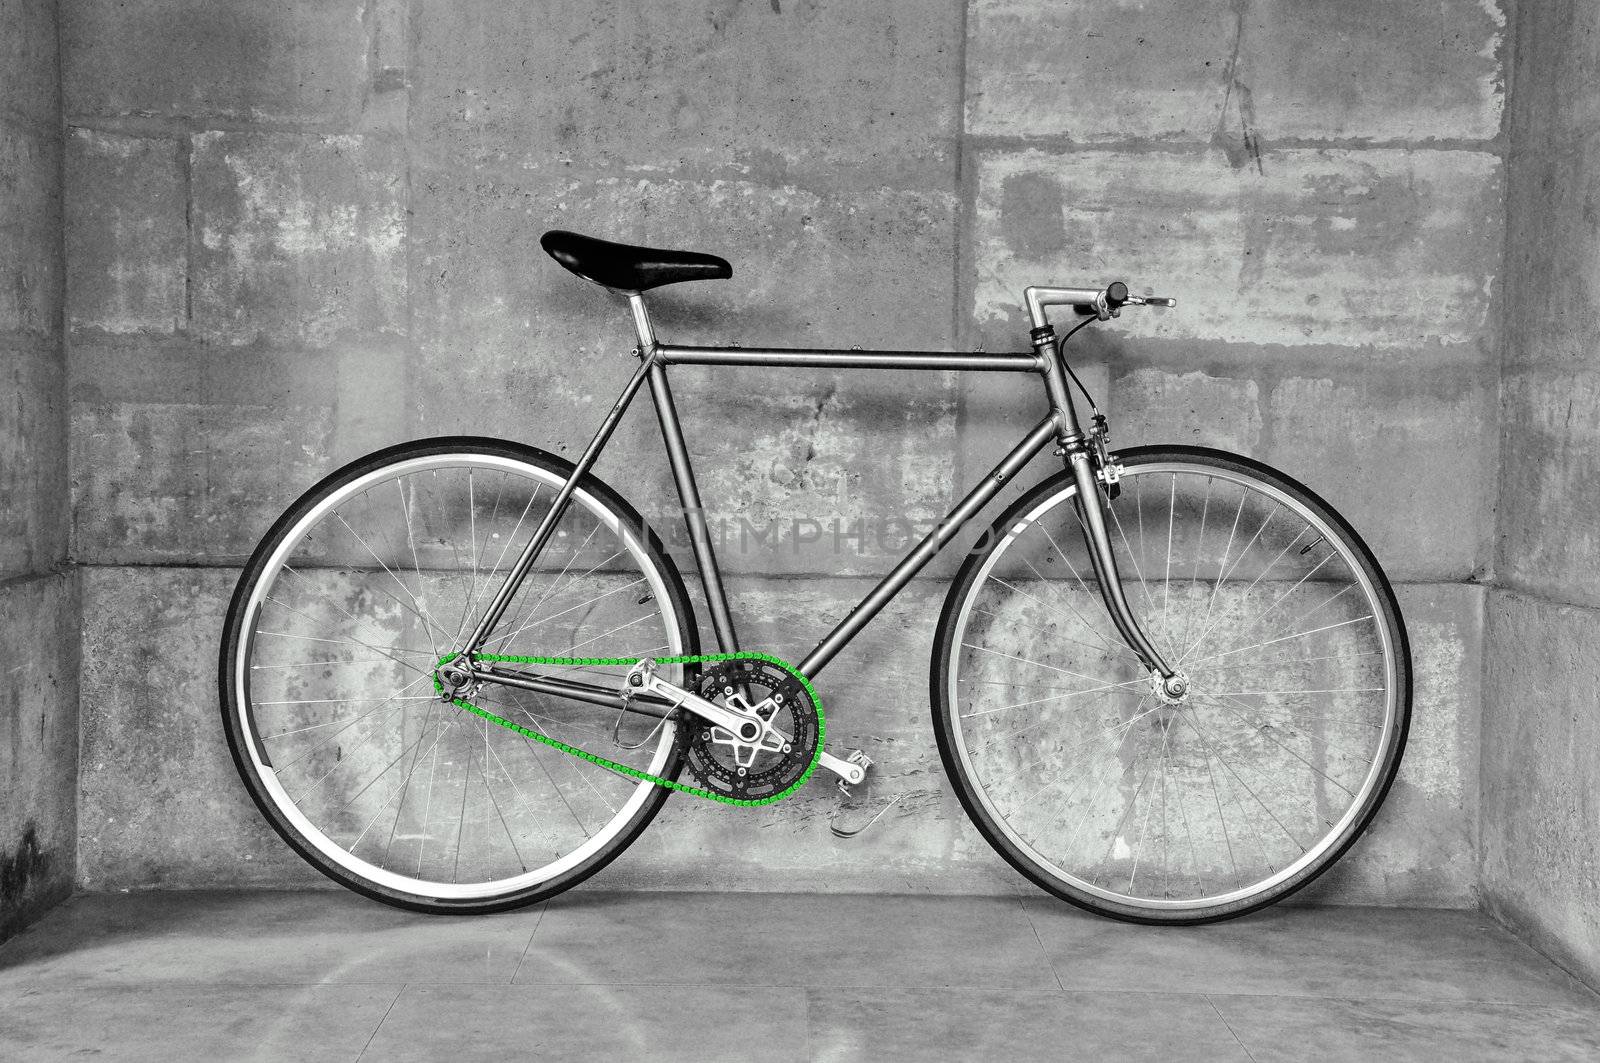 Vintage fixed gear bicycle, black & white picture, green chain